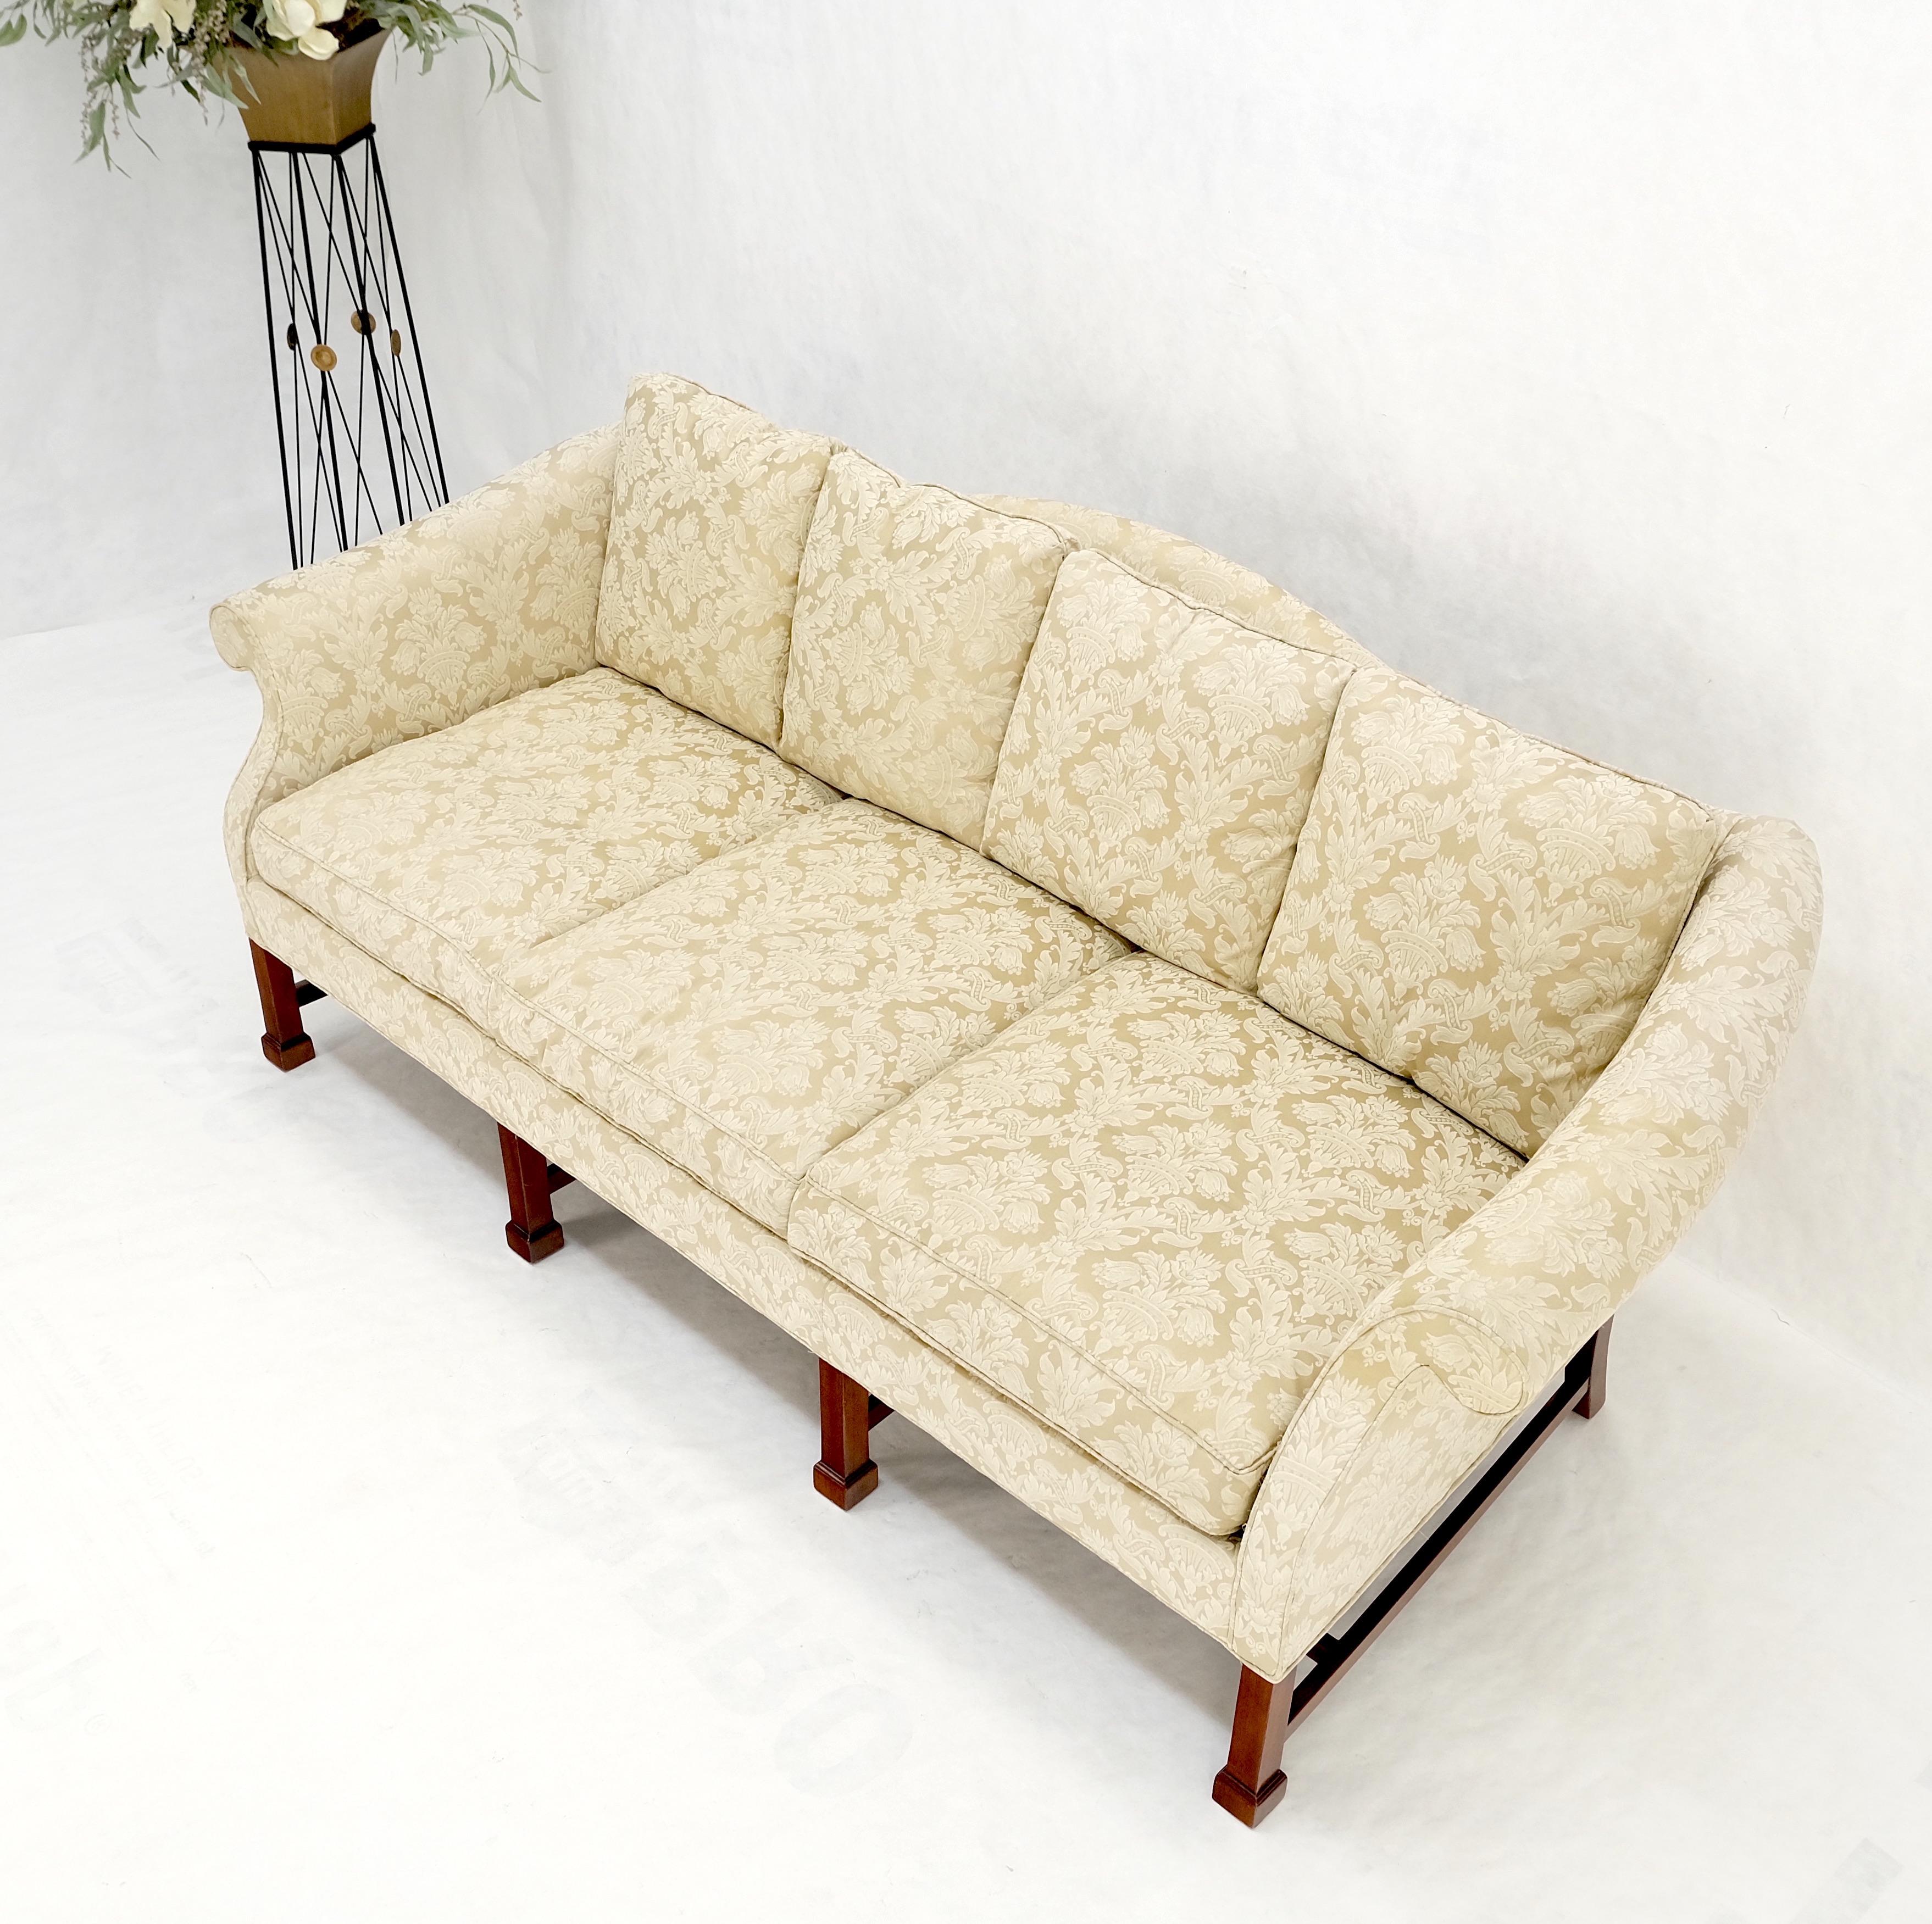 Camel Back Federal Style Mahogany Stretcher Base Beige Upholstery Sofa Mint! For Sale 4